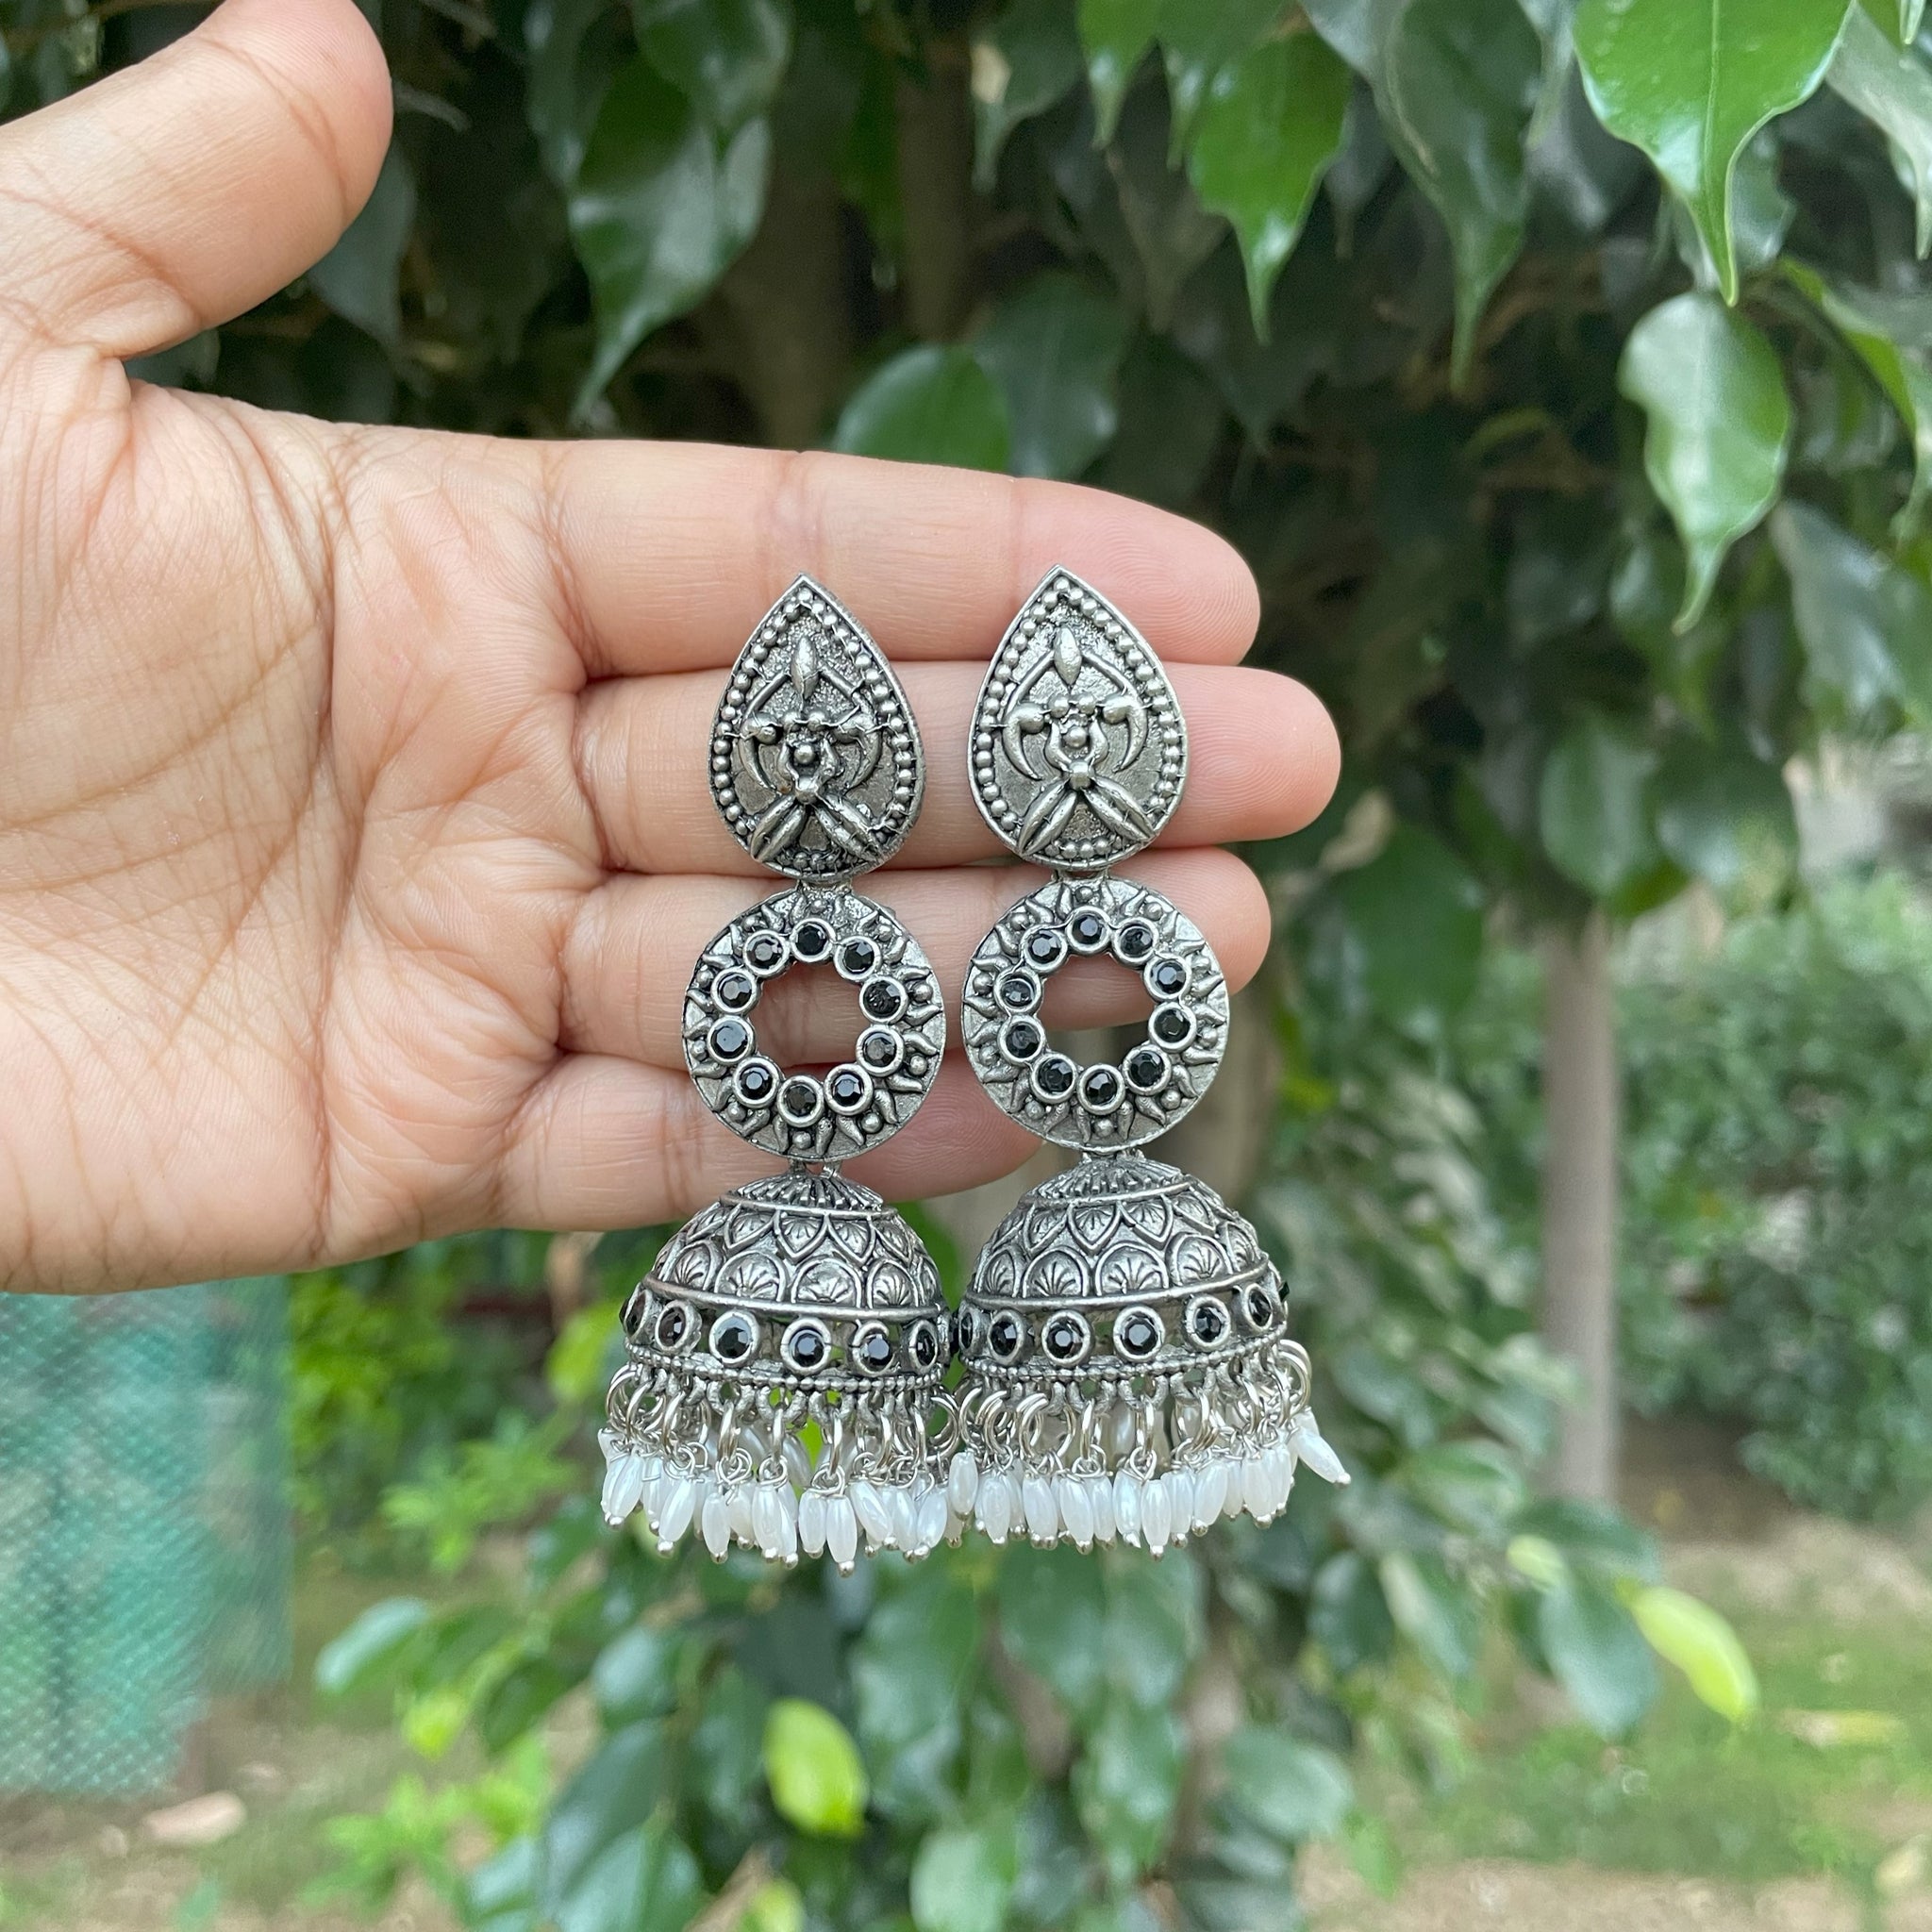 Beautiful silver-plated Jhumka earrings with intricate floral, triangular,  and circular designs. – Rigouts – Remembering the roots.